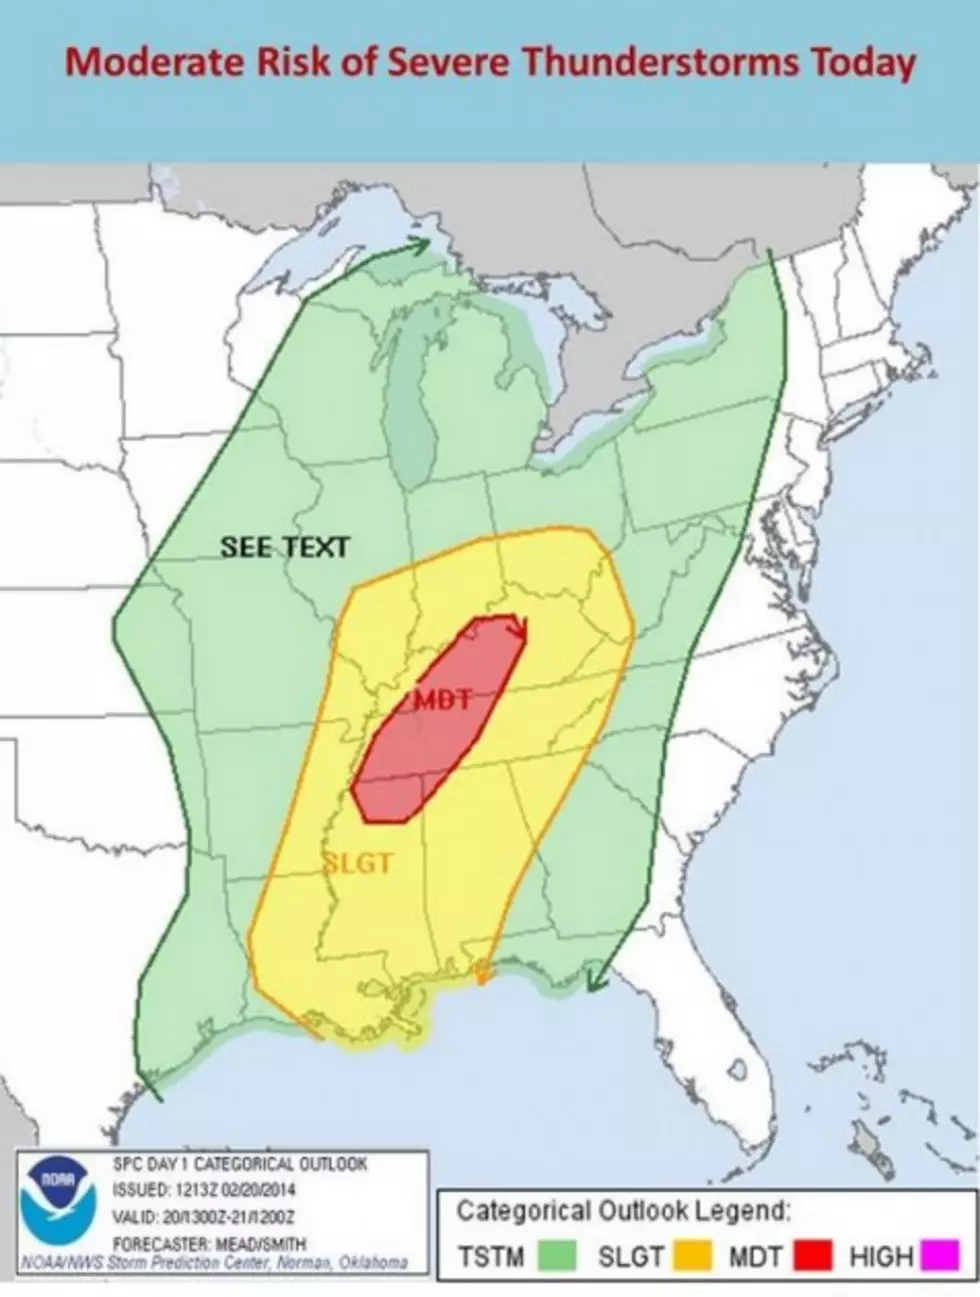 Moderate Risk of Severe Thunderstorms Today &#8211; Thursday, February 20, 2014